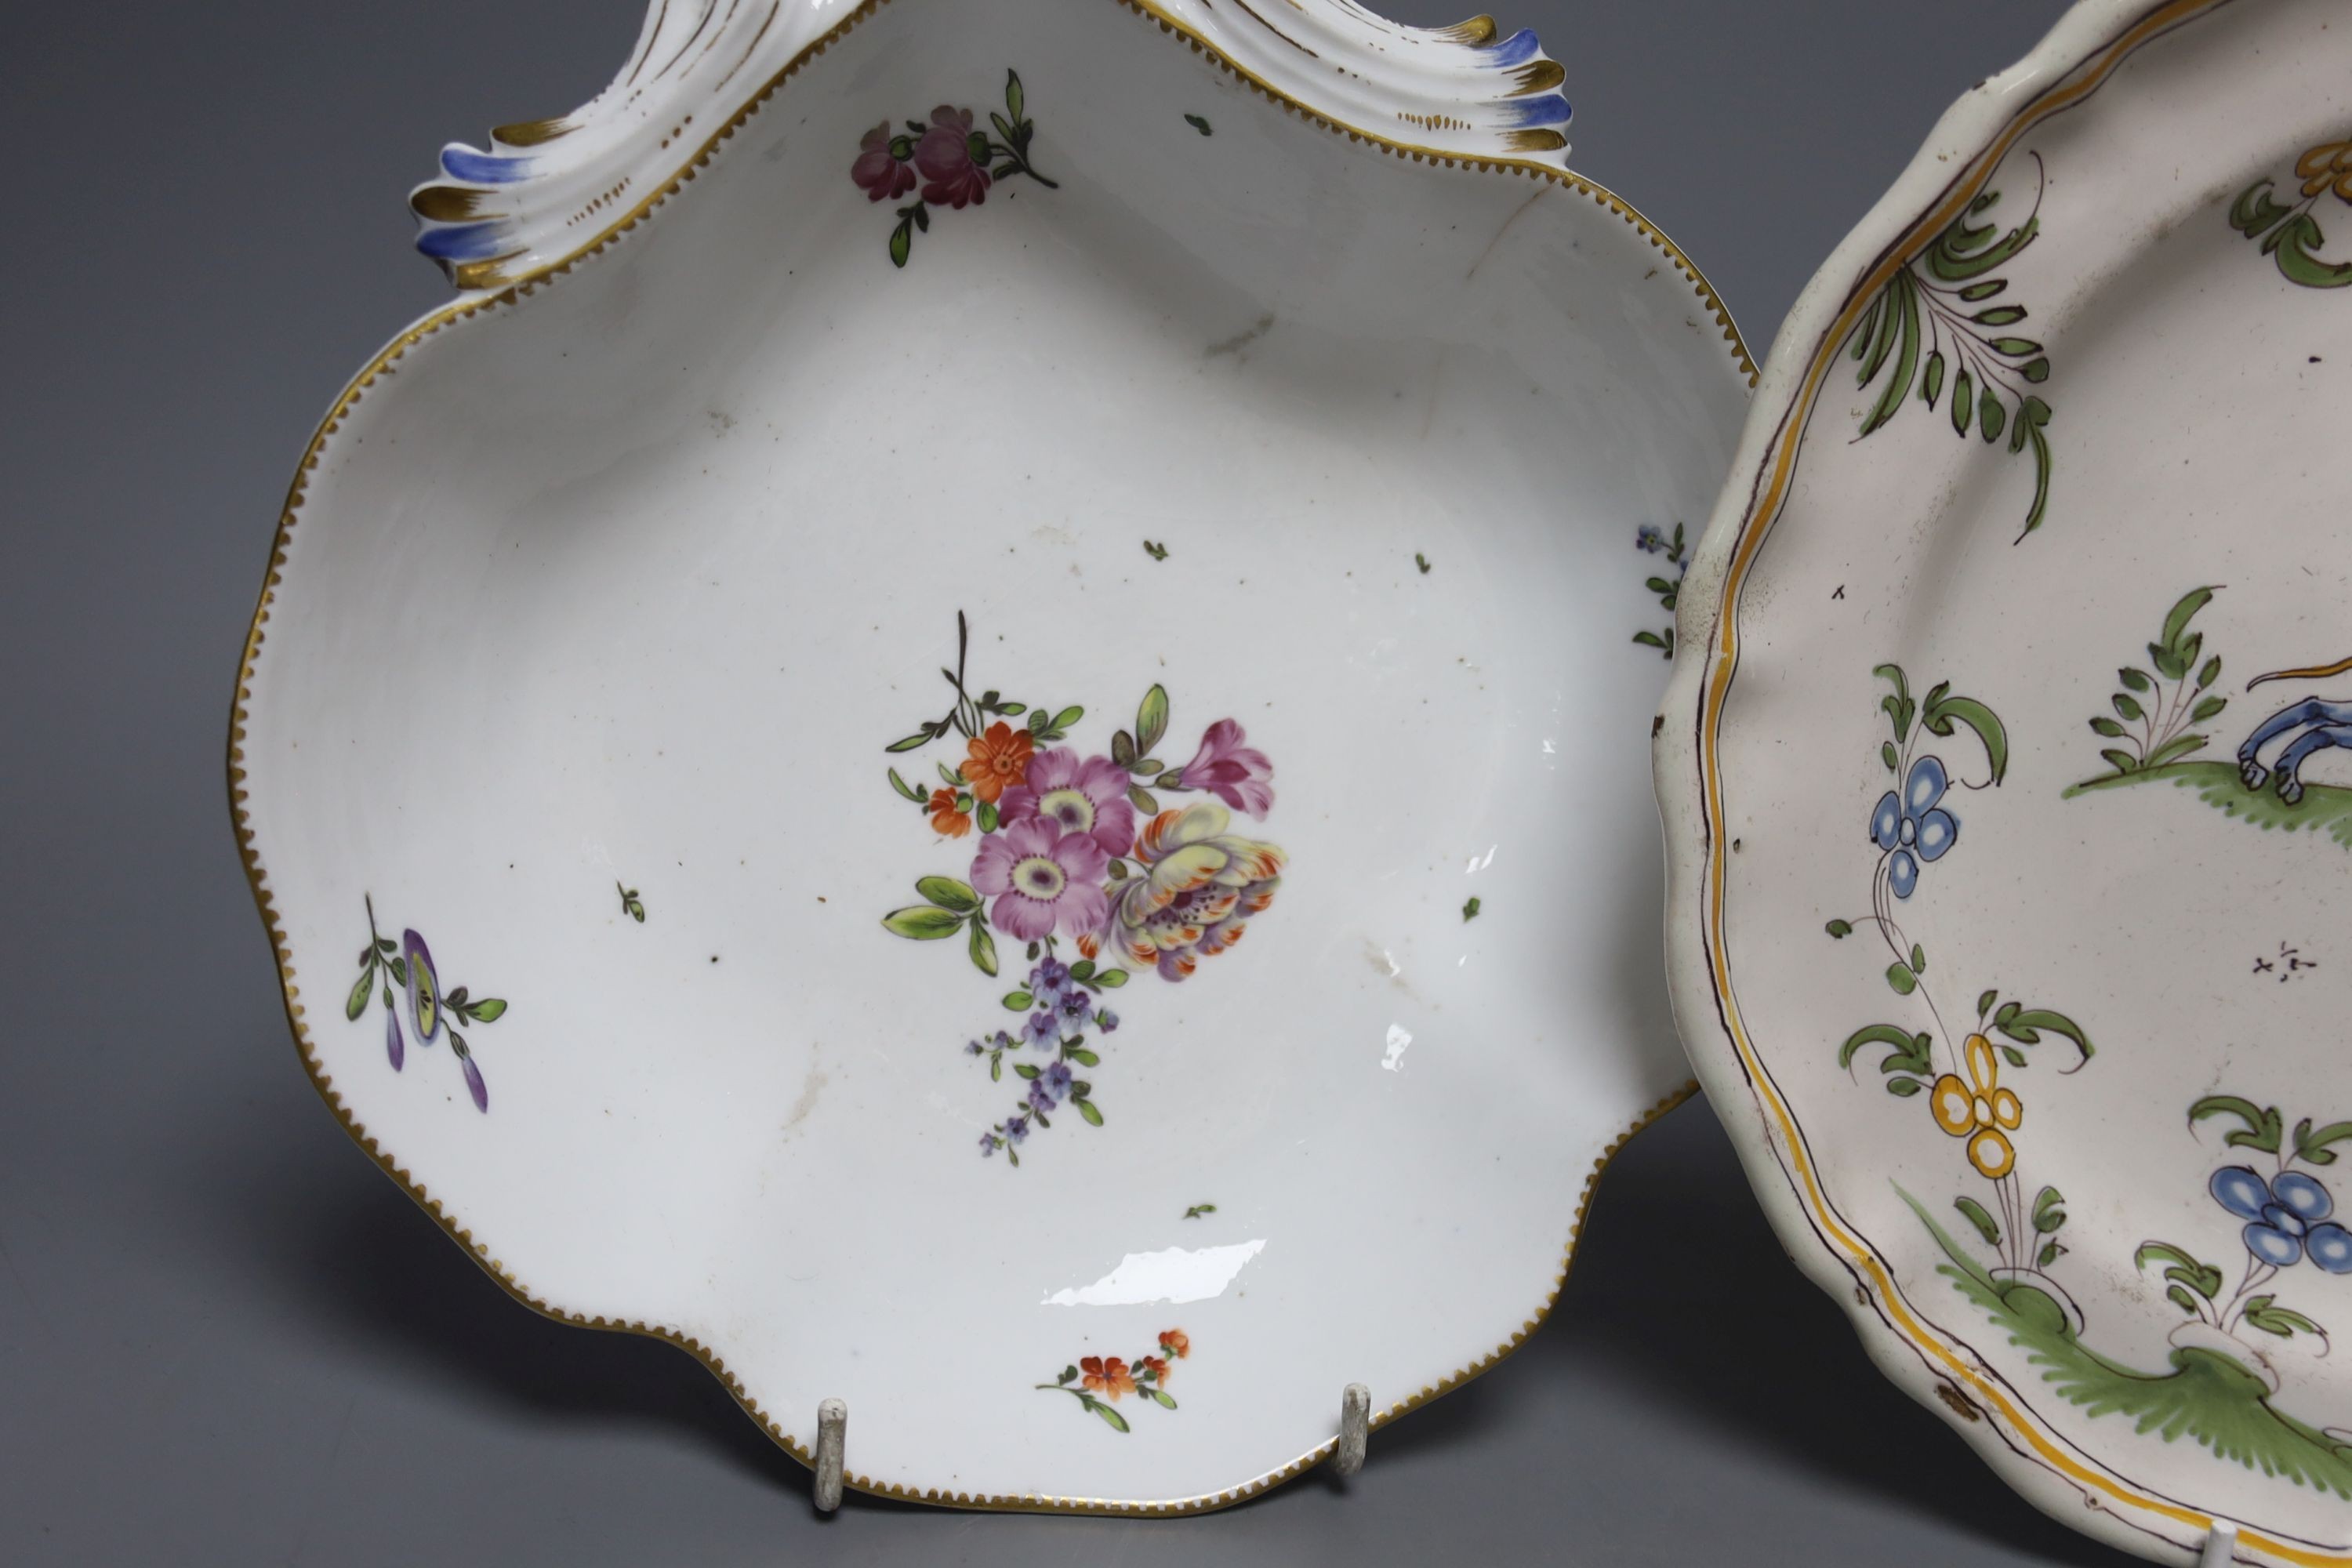 An 18th century Moustiers faience plate and a late 18th century Continental porcelain desert dish, plate 25 cms diameter.